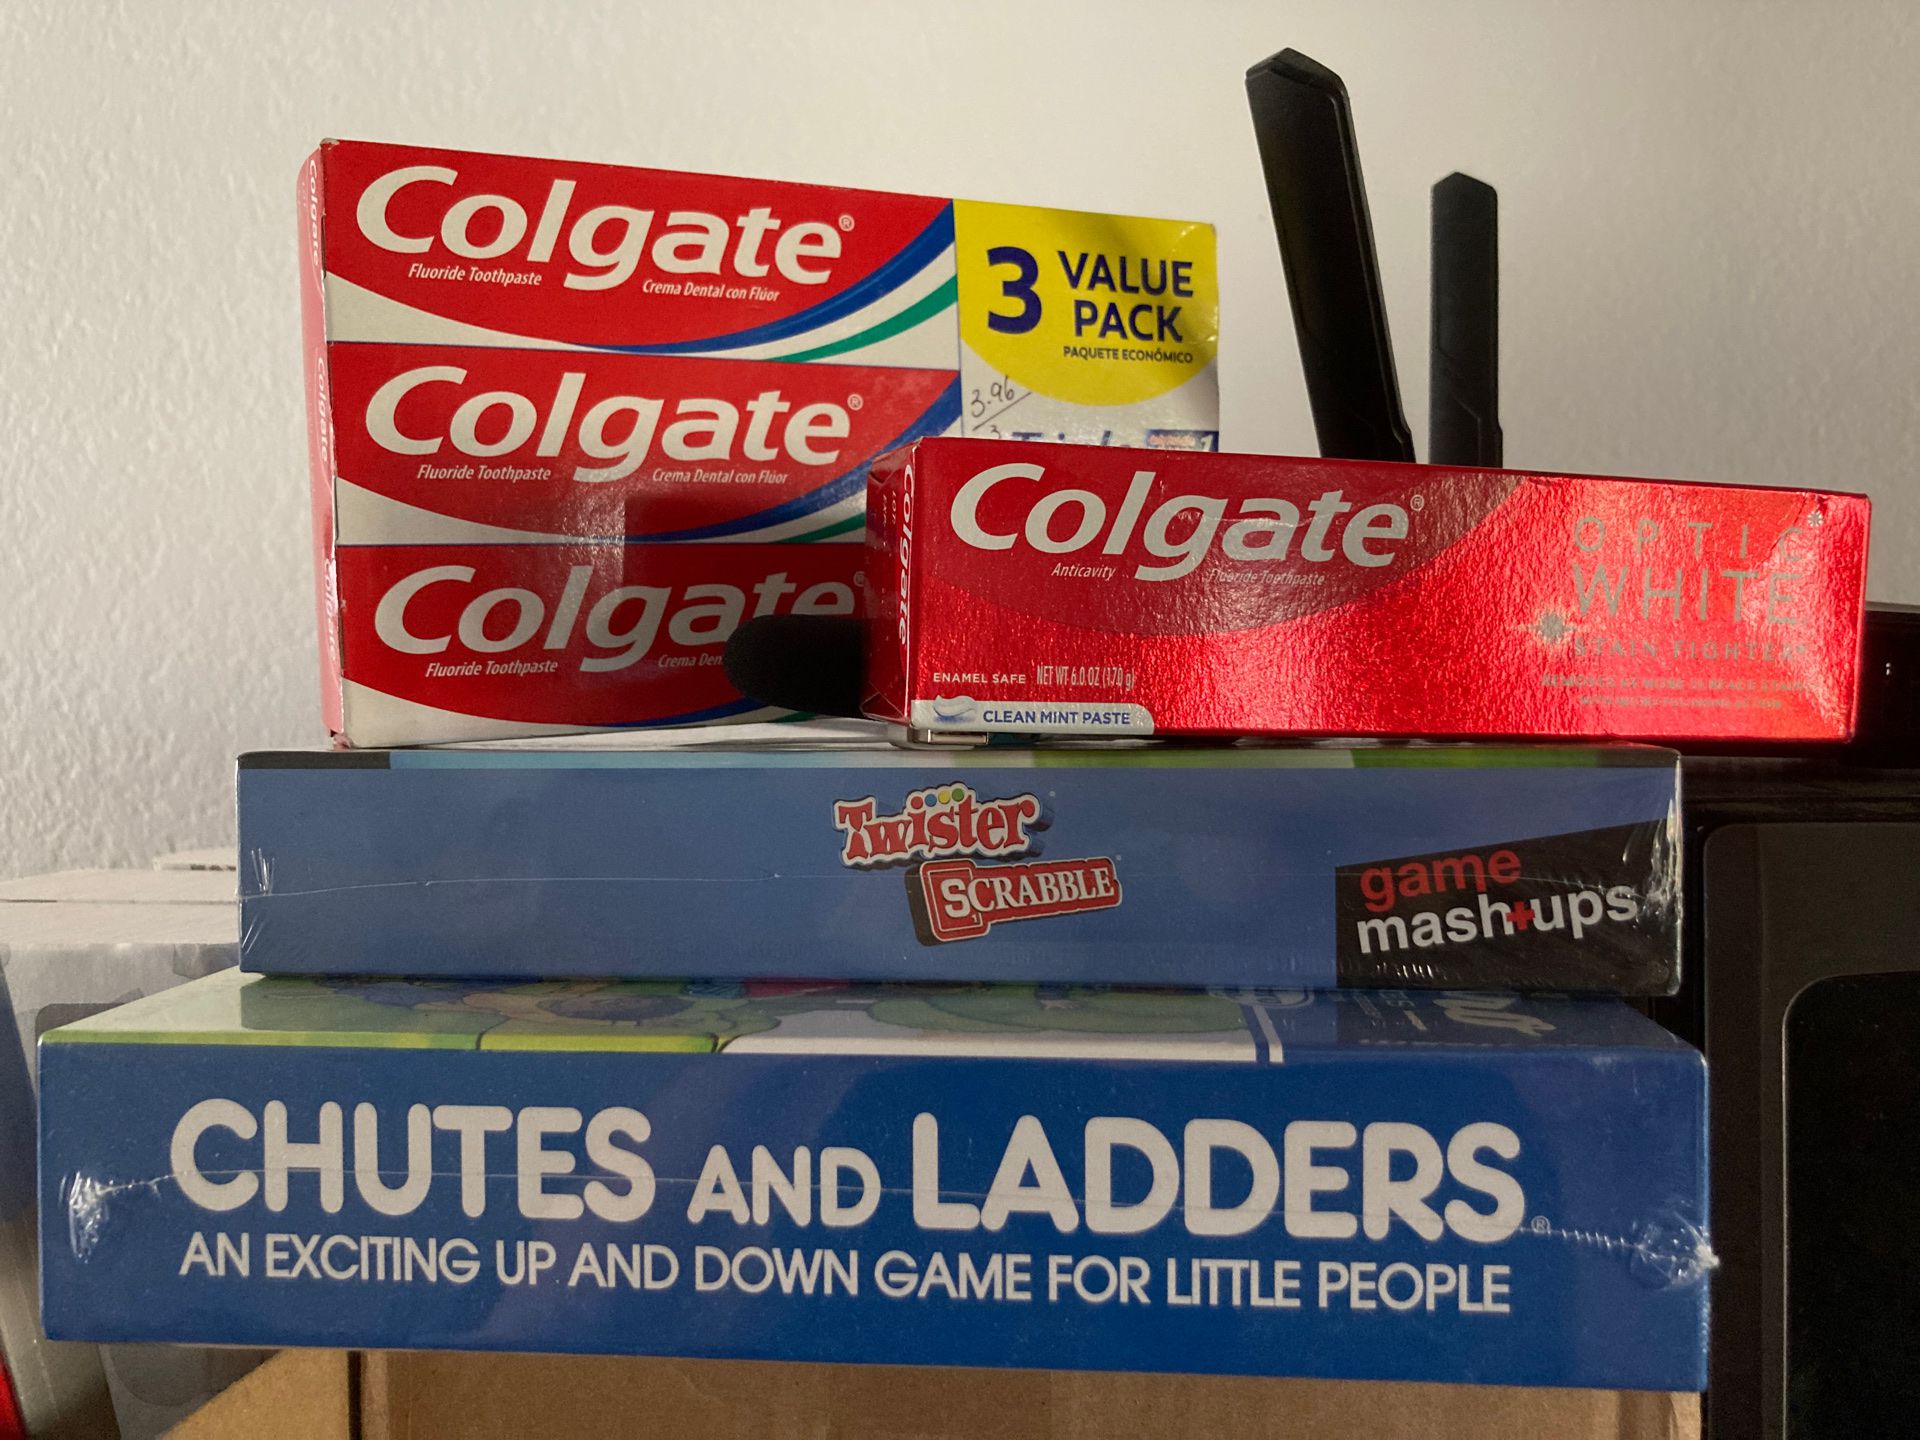 Chutes and ladders retro board game + twister x scrabble board game + Colgate toothpaste